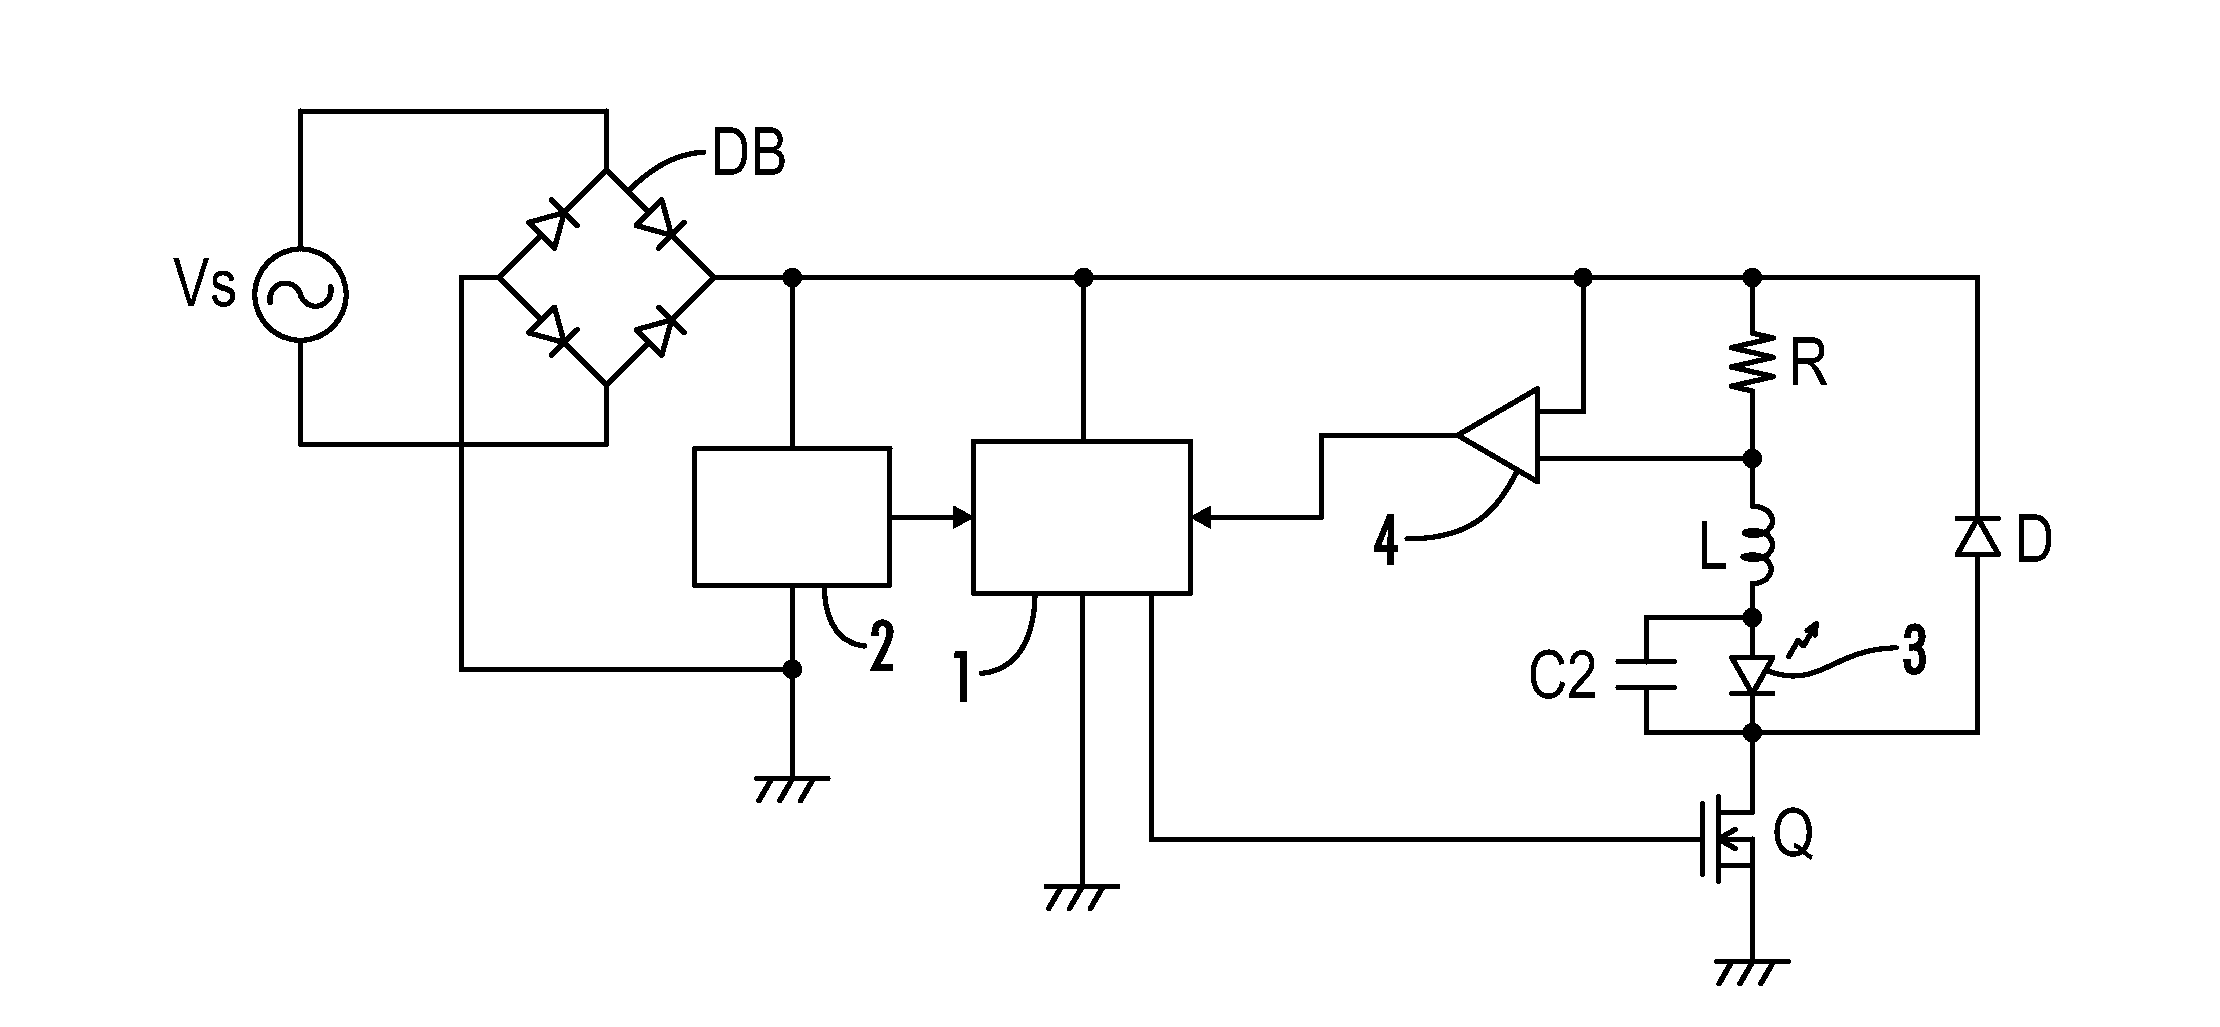 Power supply for an LED illumination device